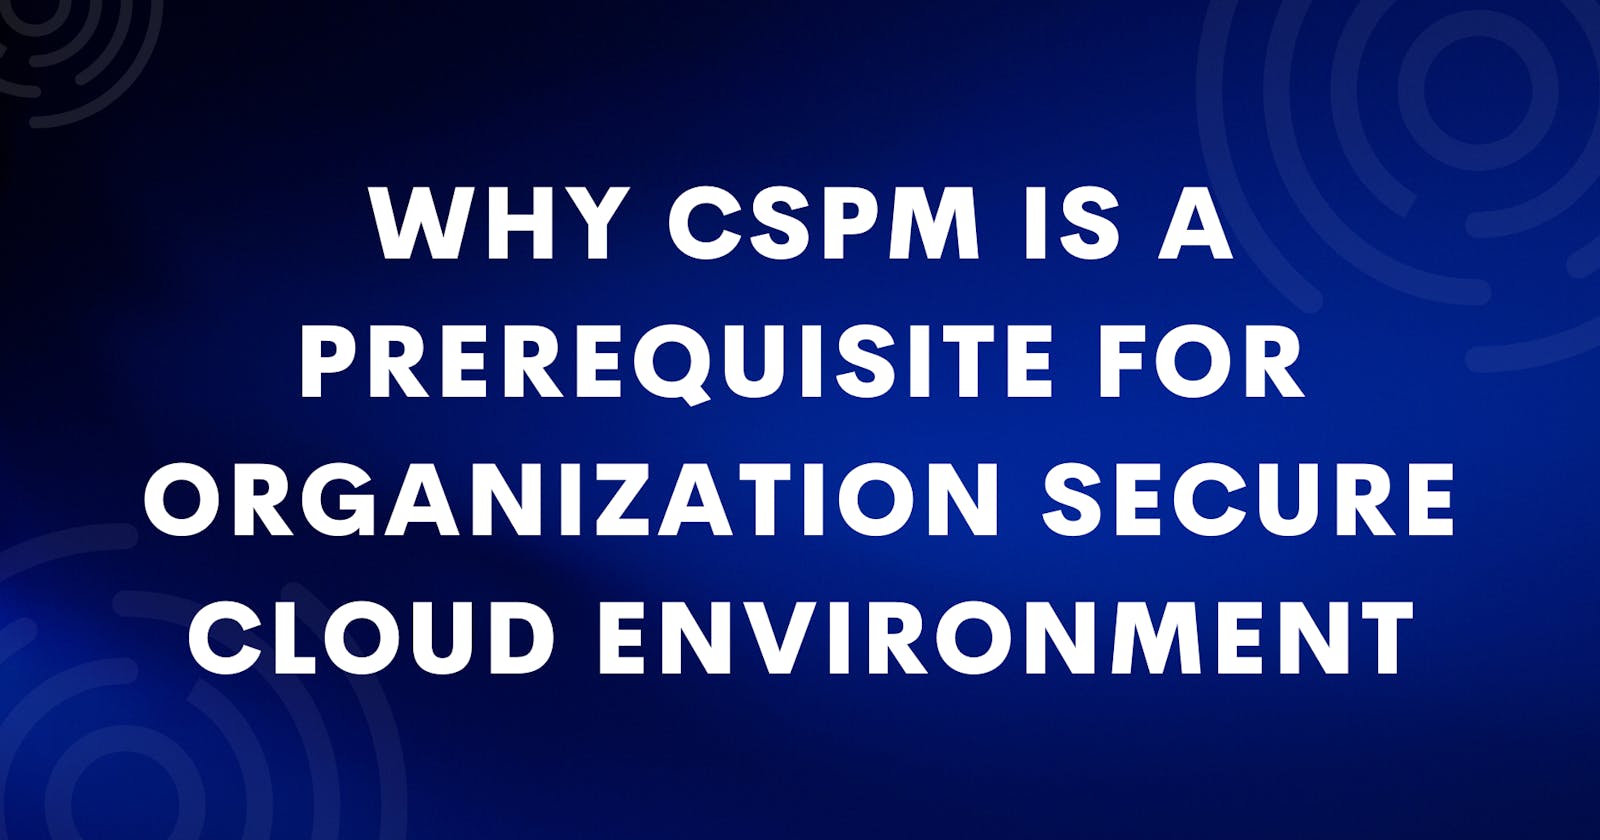 Why CSPM is a Prerequisite for Organization Secure Cloud Environment